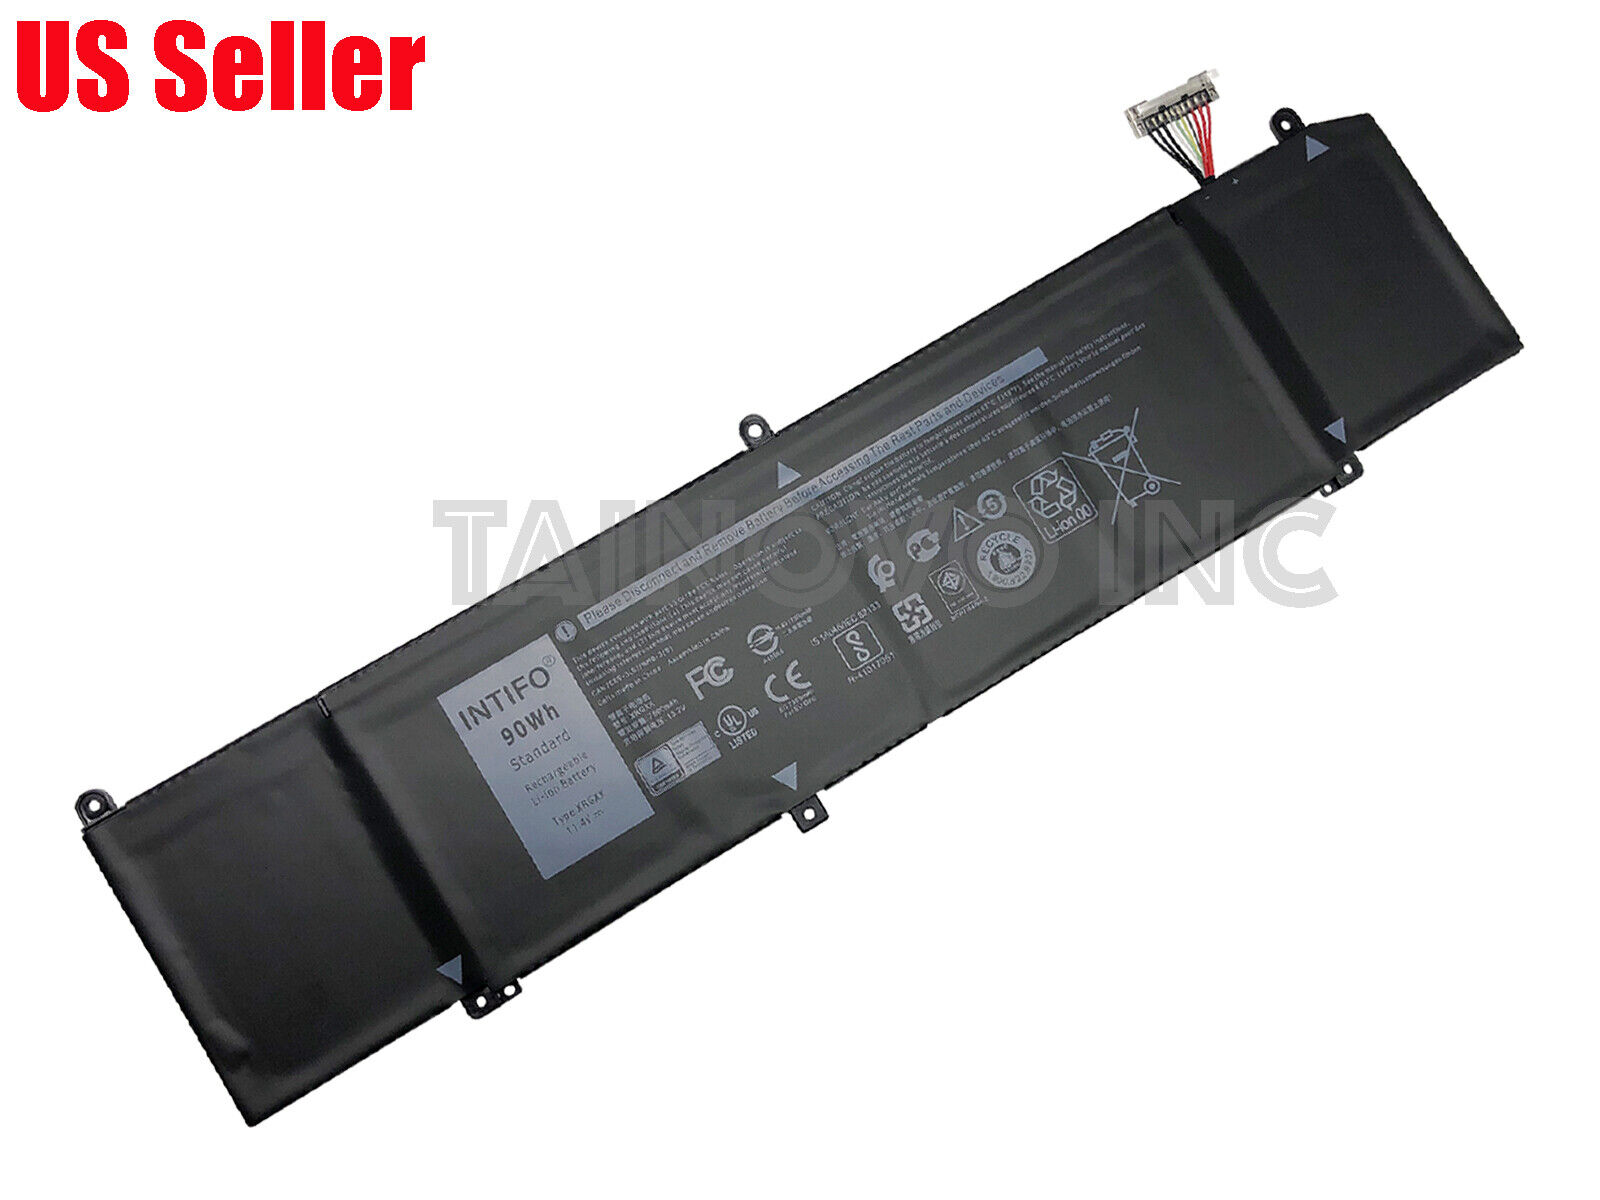 90Wh XRGXX Battery Fits for Dell Alienware 2018 Year Orion M15 M17 1F22N JJPFK